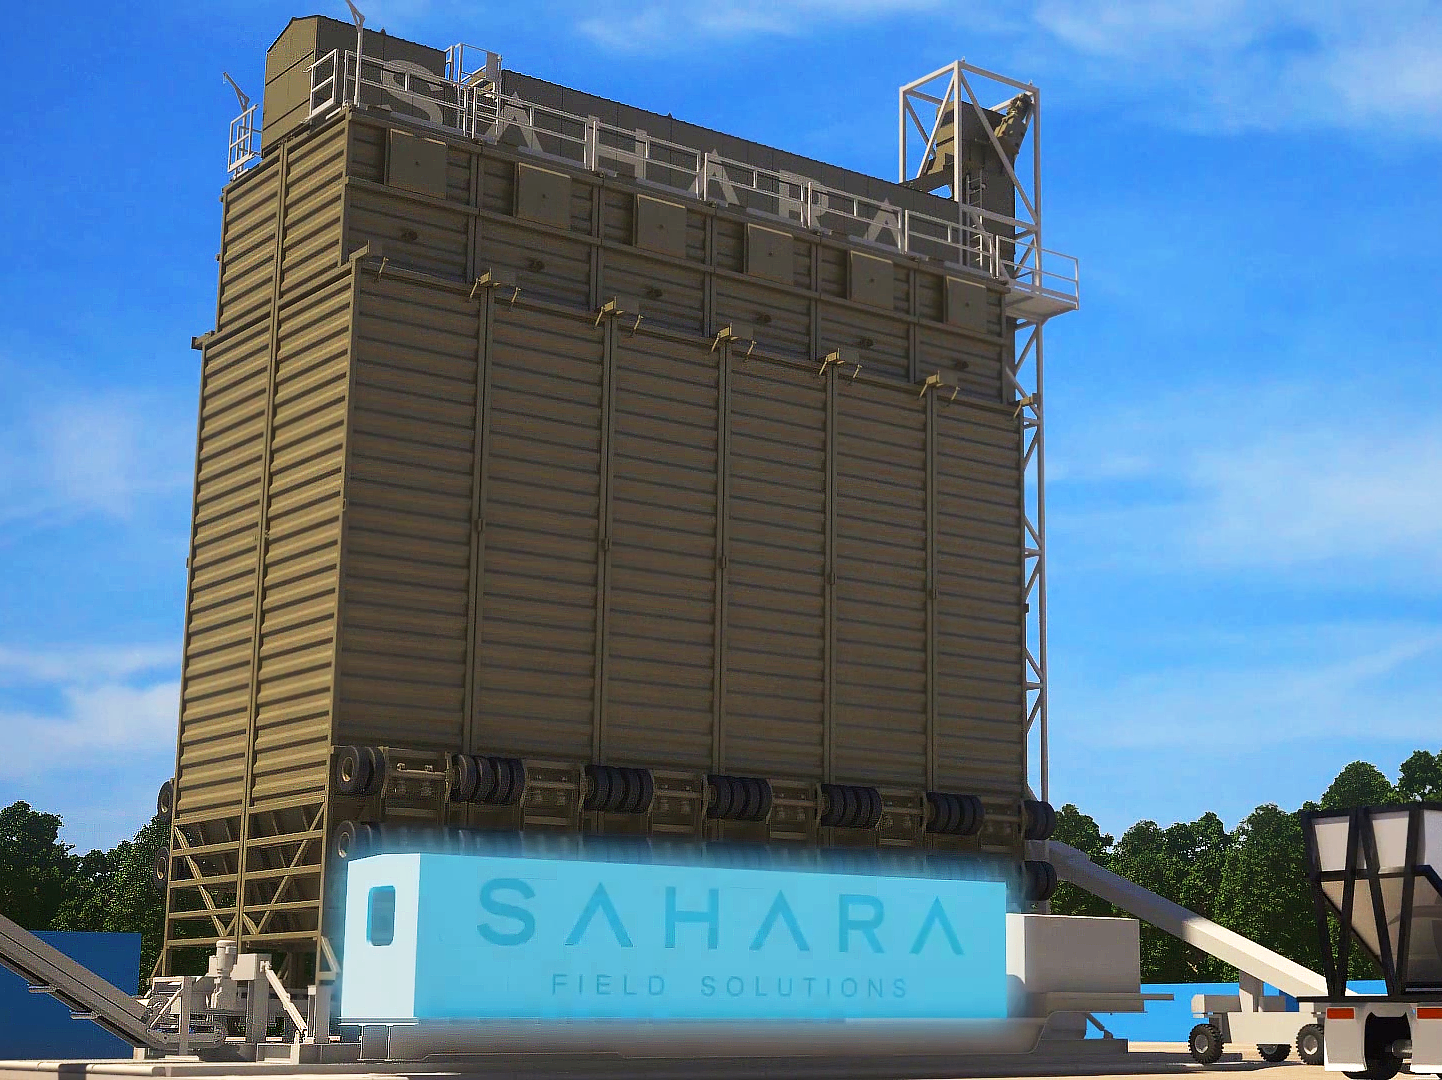 This is a still image from Trinity's engineering animation demonstrating the Sahara Unit, a proppant storage and handling system. This particular image displays the Sahara Unit from a low camera angle. Trinity artists are able to manipulate the appearance of certain materials to bring attention to the item which they are speaking of during the video such as the power unit that is glowing blue in this image.